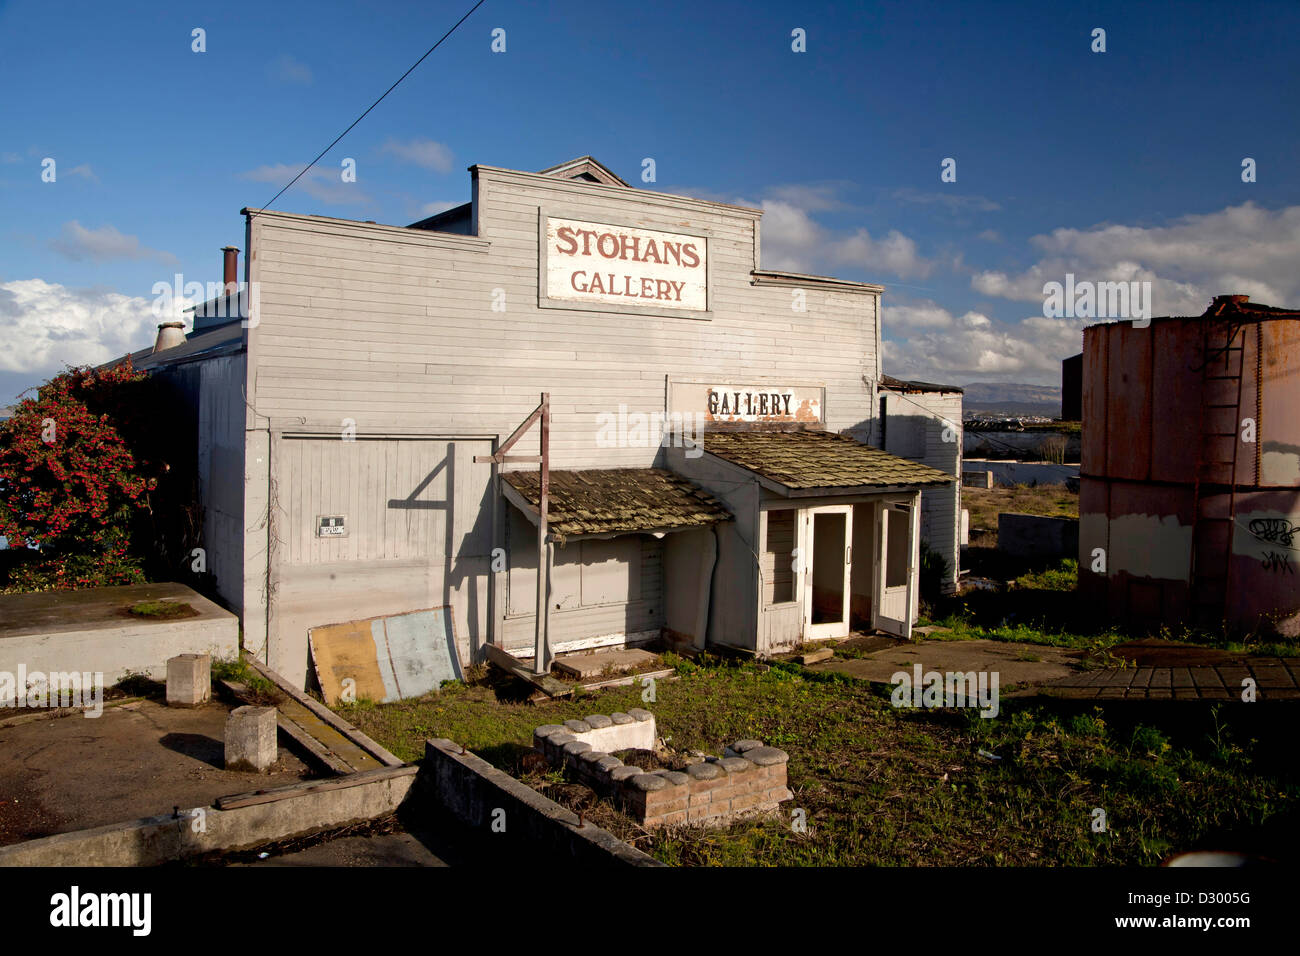 Abandoned Stohans Gallery building on Cannery Row in Monterey, California, United States of America, USA Stock Photo